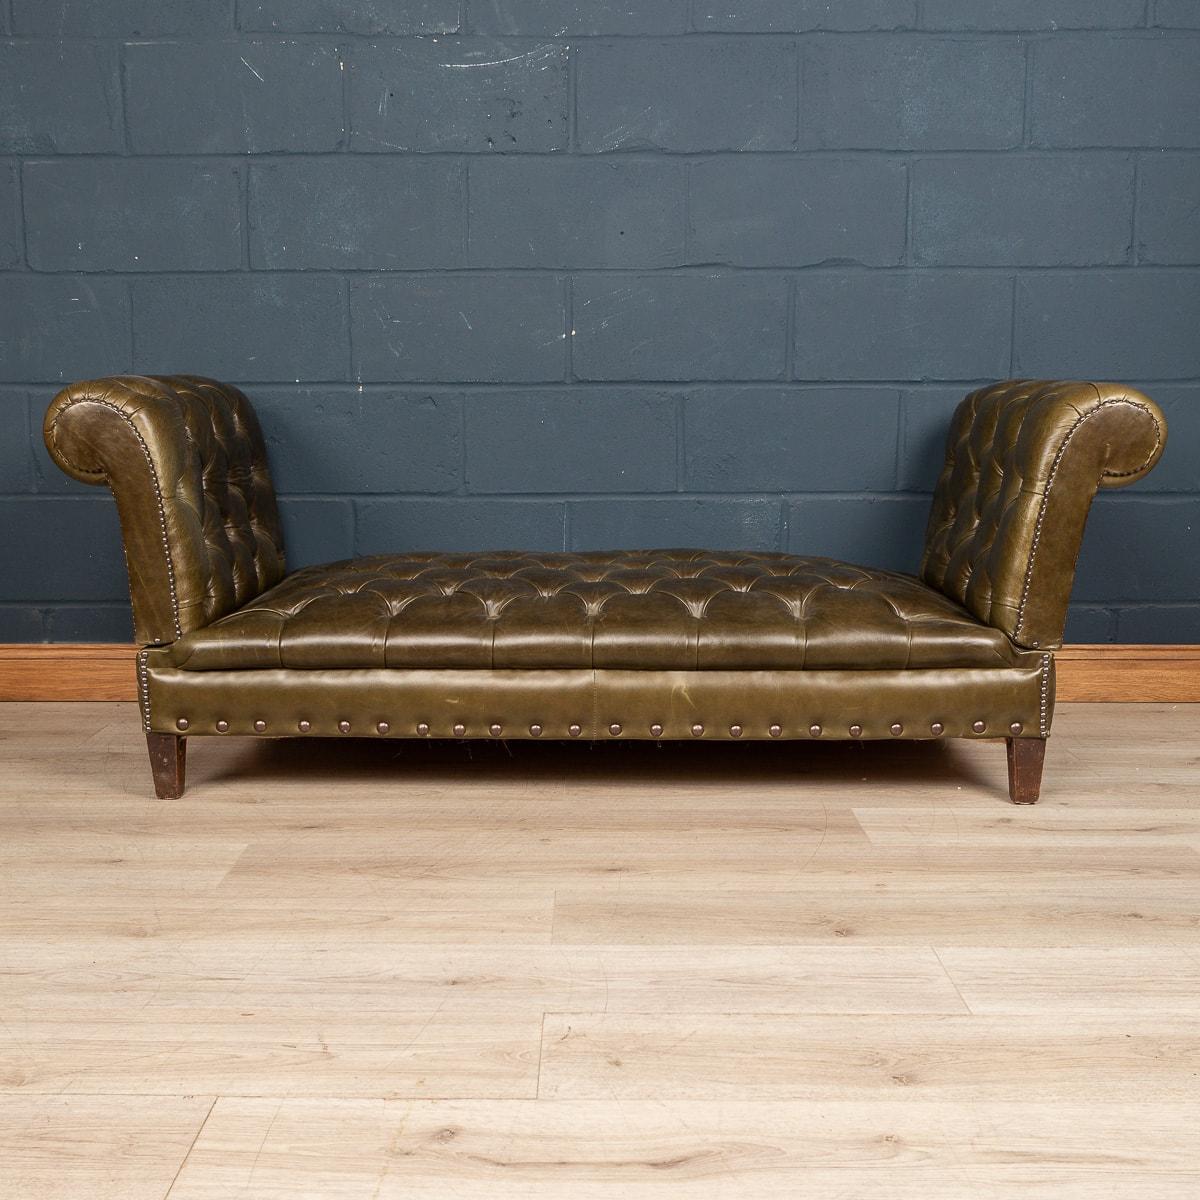 A very unusual leather day bed or window seat. Made in the latter part of the last century, this wonderful piece of furniture has been hand crafted in England by an excellent furniture maker. Both the seating area and the armrests with buttoned down